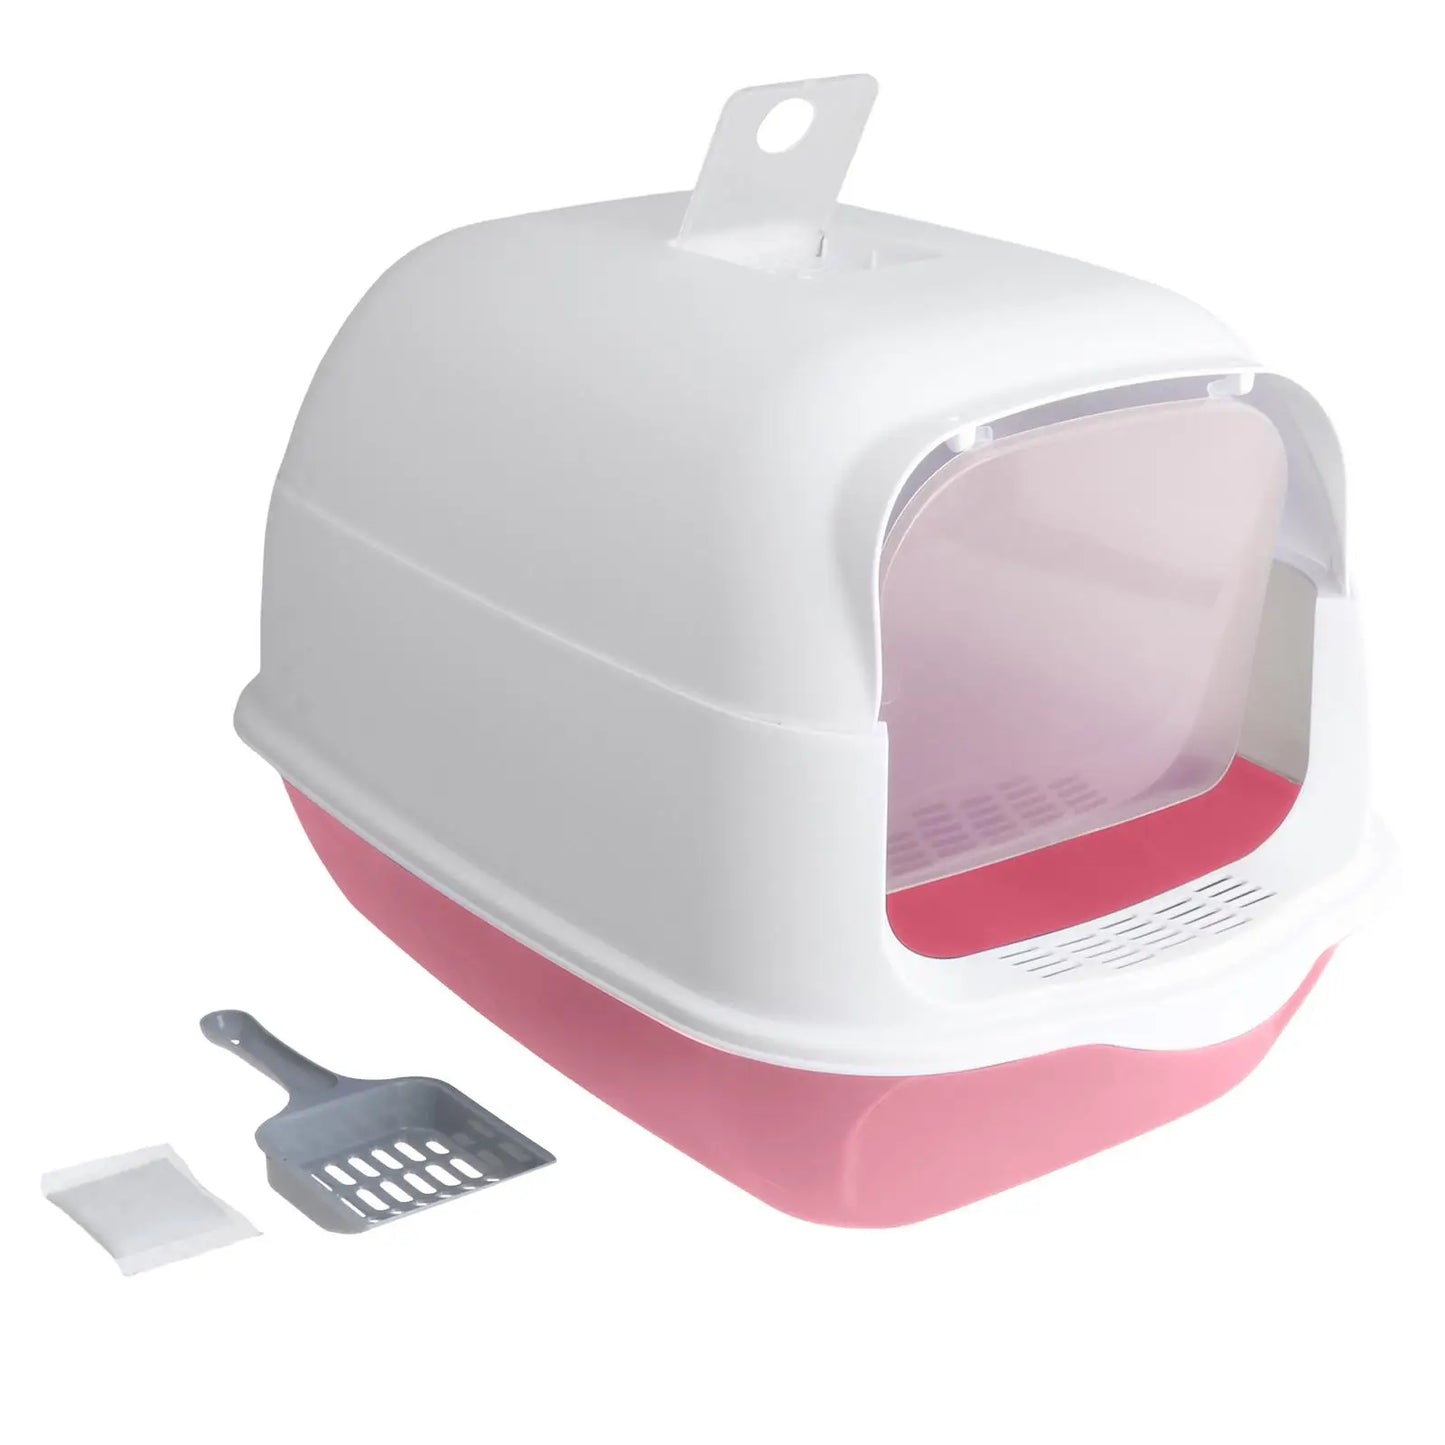 Hooded Cat Litter Box Enclosed and Covered Cat Toilet with Door Reusable Easy to Carry and Clean Portable Pet Litter Box